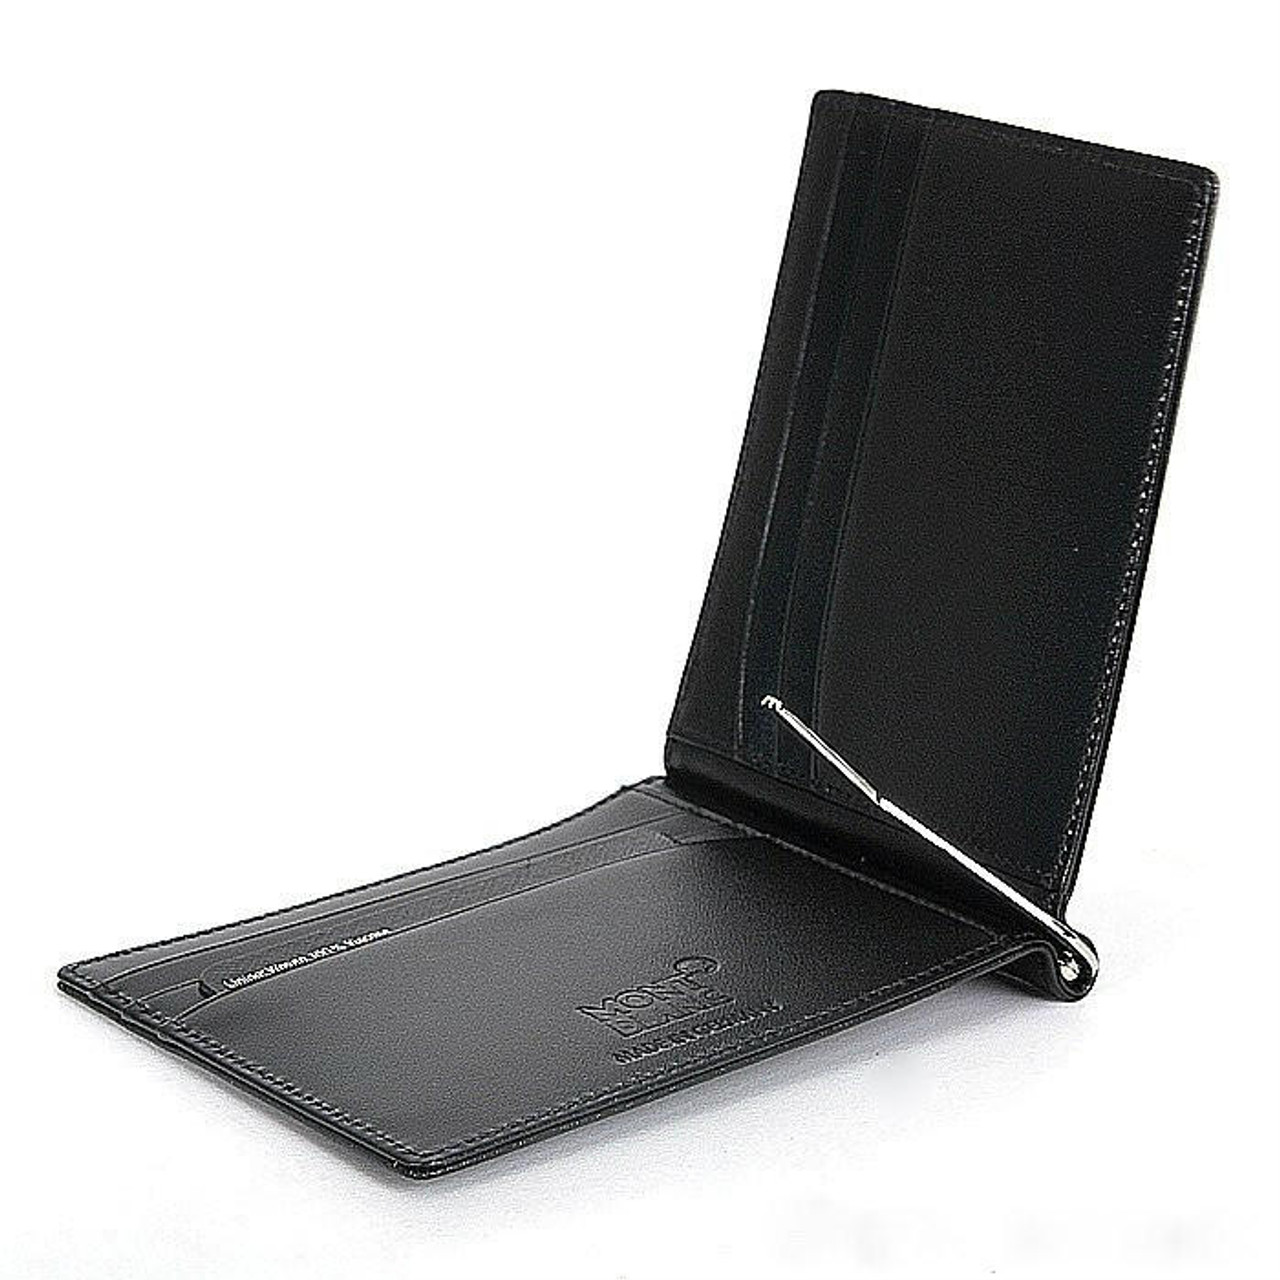 Meisterstück Wallet 6cc with Money Clip Small - Luxury Credit card